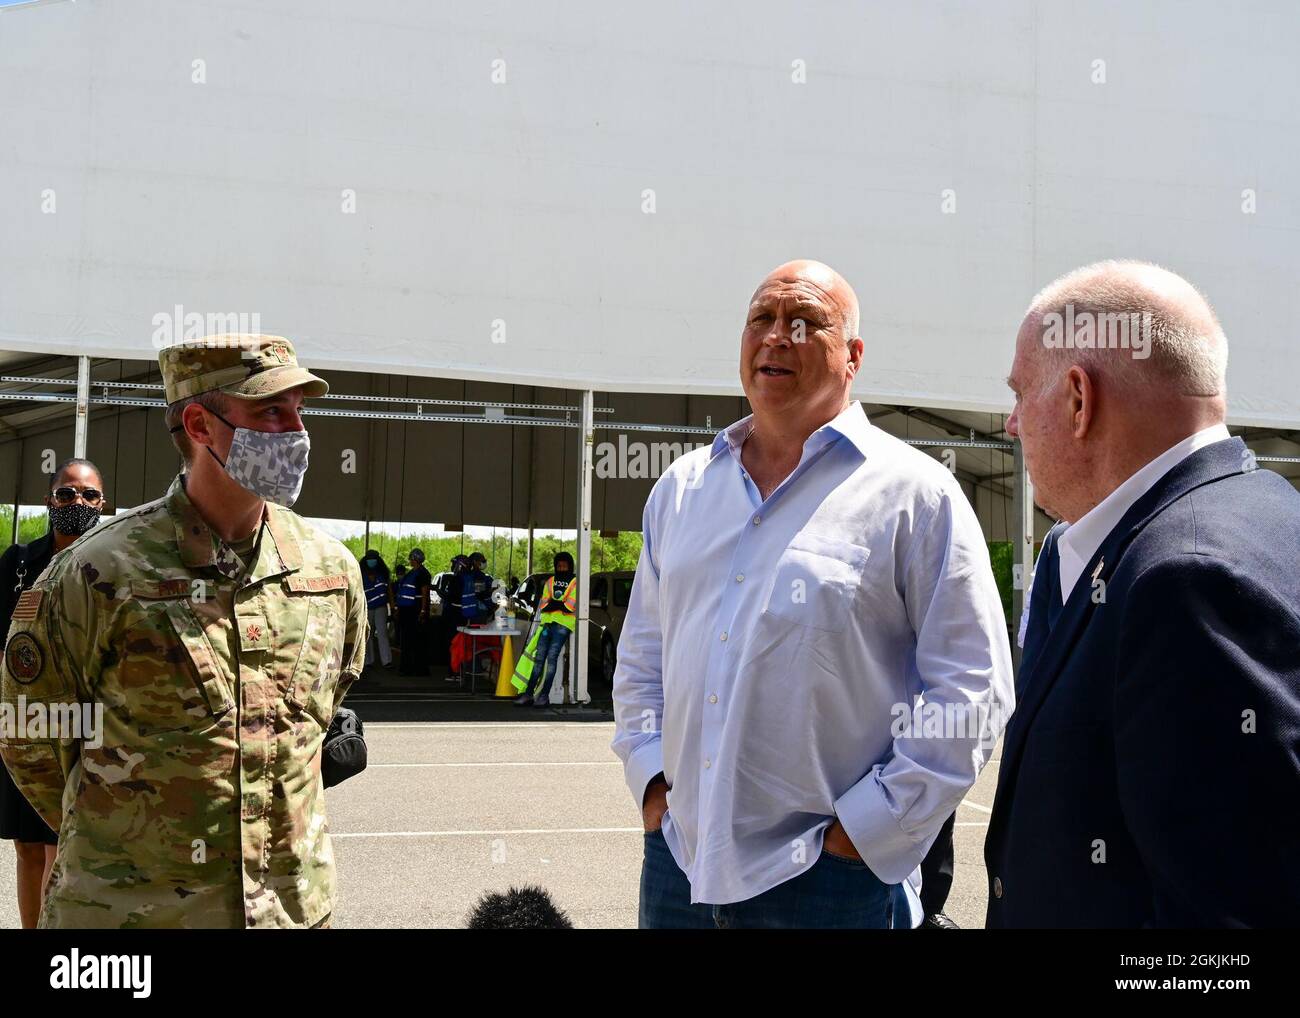 U.S. Air Force Maj. John Fink, Maryland Air National Guard, speaks with Cal Ripken Jr. and Maryland Governor Larry Hogan during a visit to the Ripken Stadium vaccination site on May 5, 2021, in Aberdeen, Maryland. Fink has supported the planning and setup of numerous mass vaccination sites throughout the state. Stock Photo